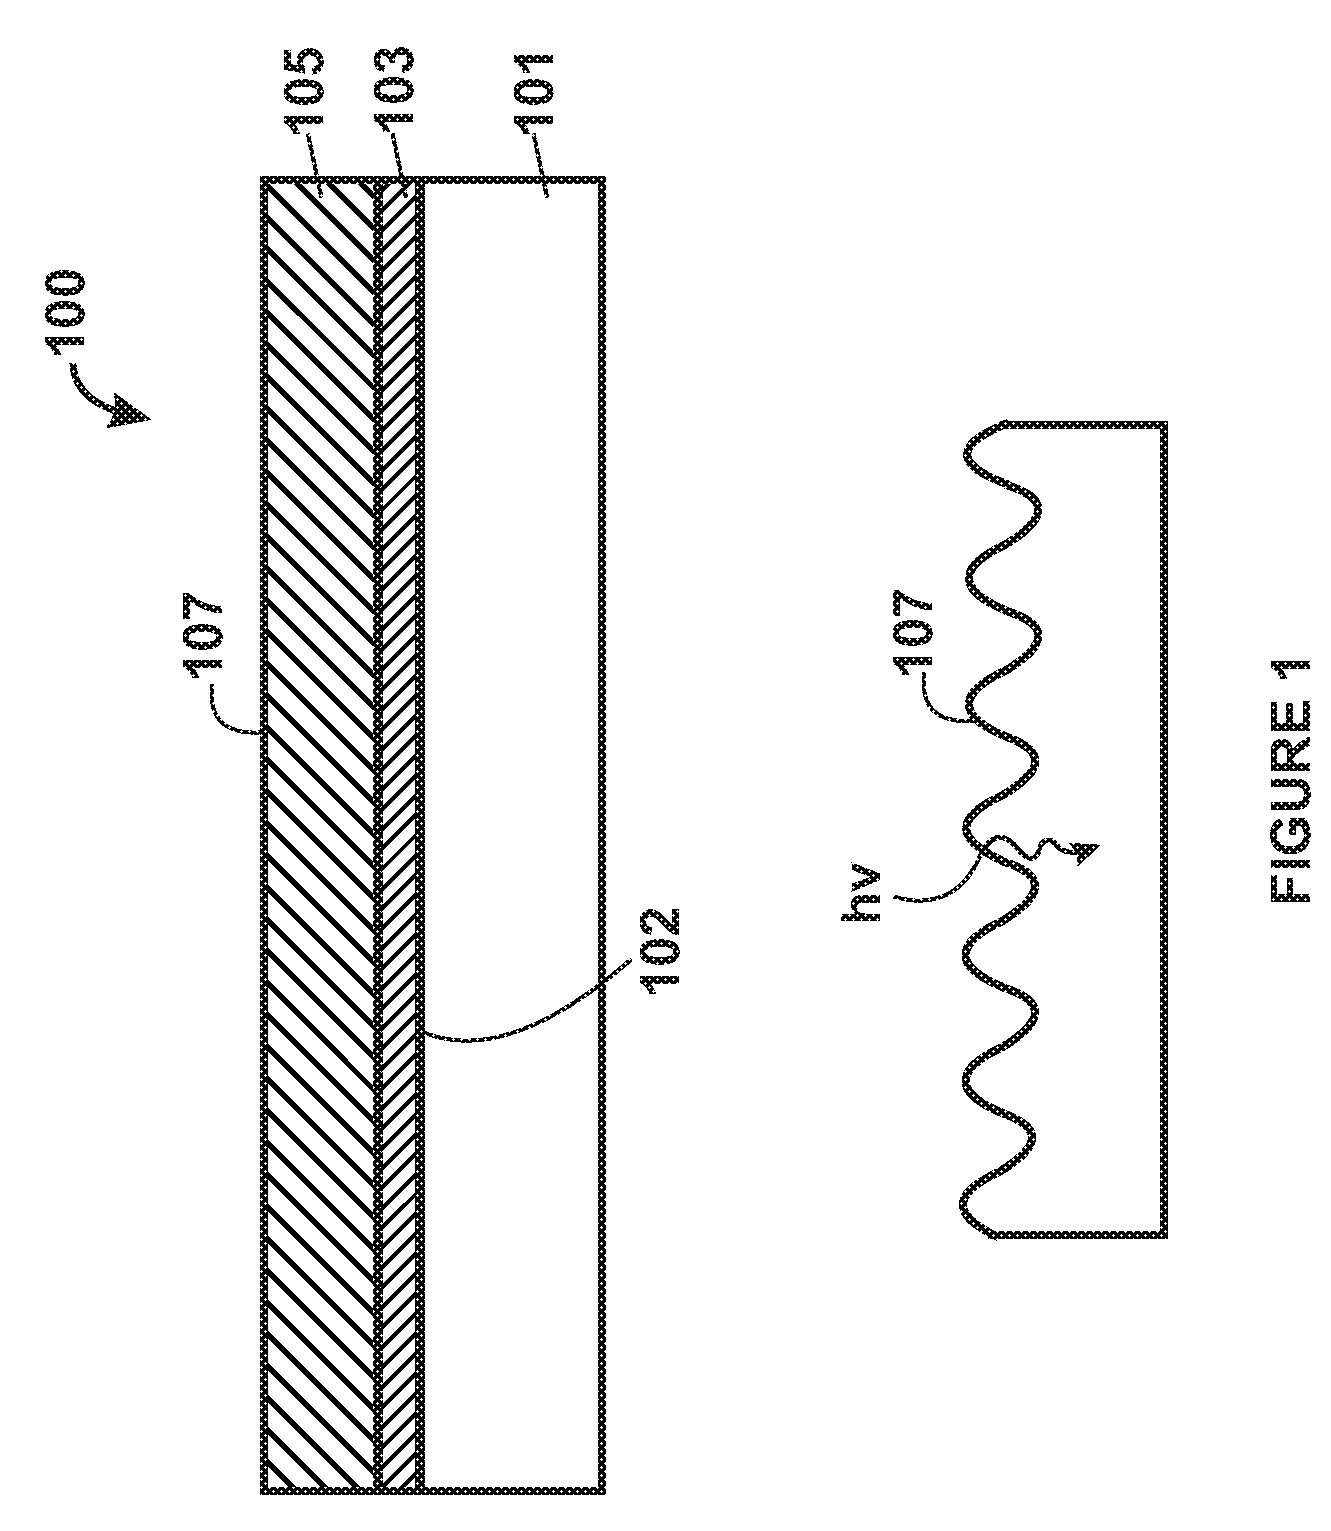 Texture process and structure for manufacture of composite photovoltaic device substrates